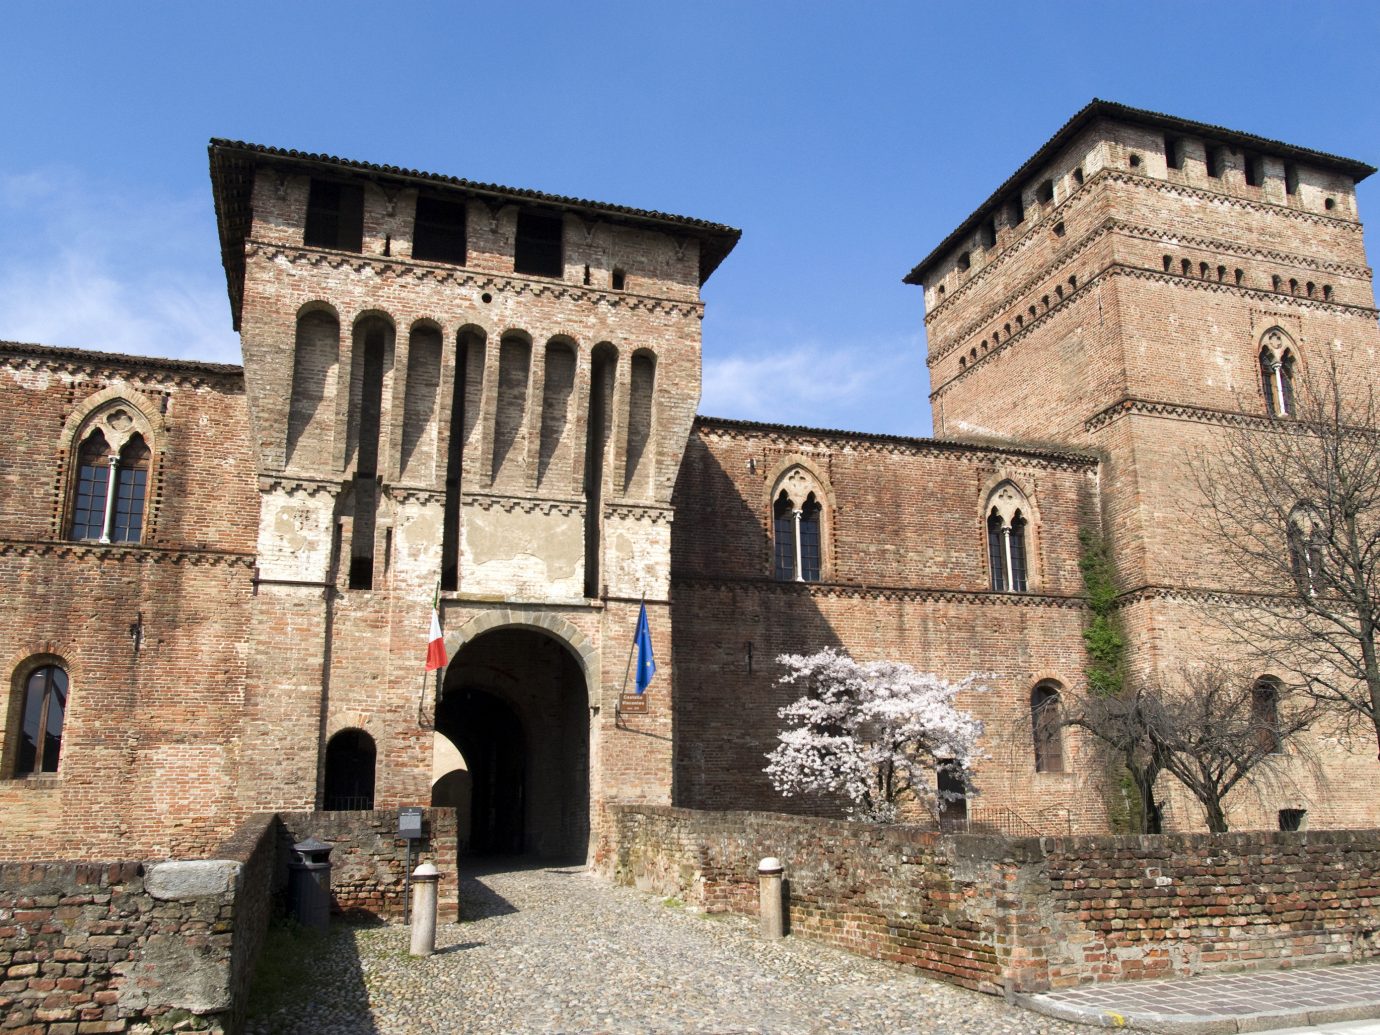 Arts + Culture Italy Milan Trip Ideas historic site medieval architecture building wall history fortification arch sky ancient history castle facade middle ages palace château